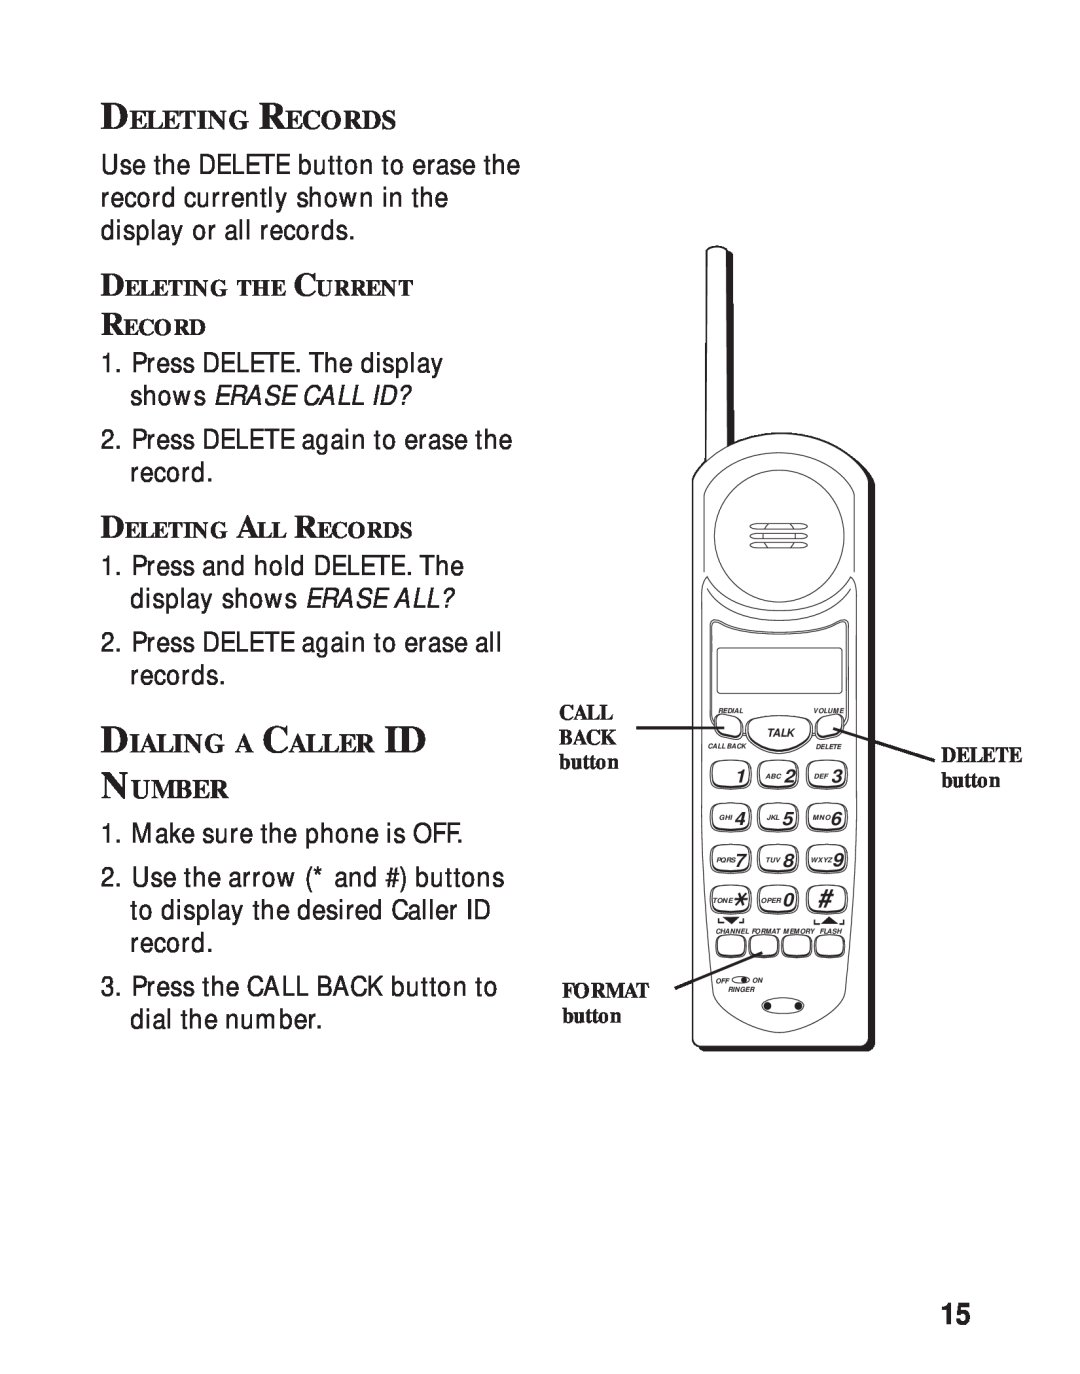 RCA 26730 manual Deleting Records, Dialing A Caller Id Back, Number 